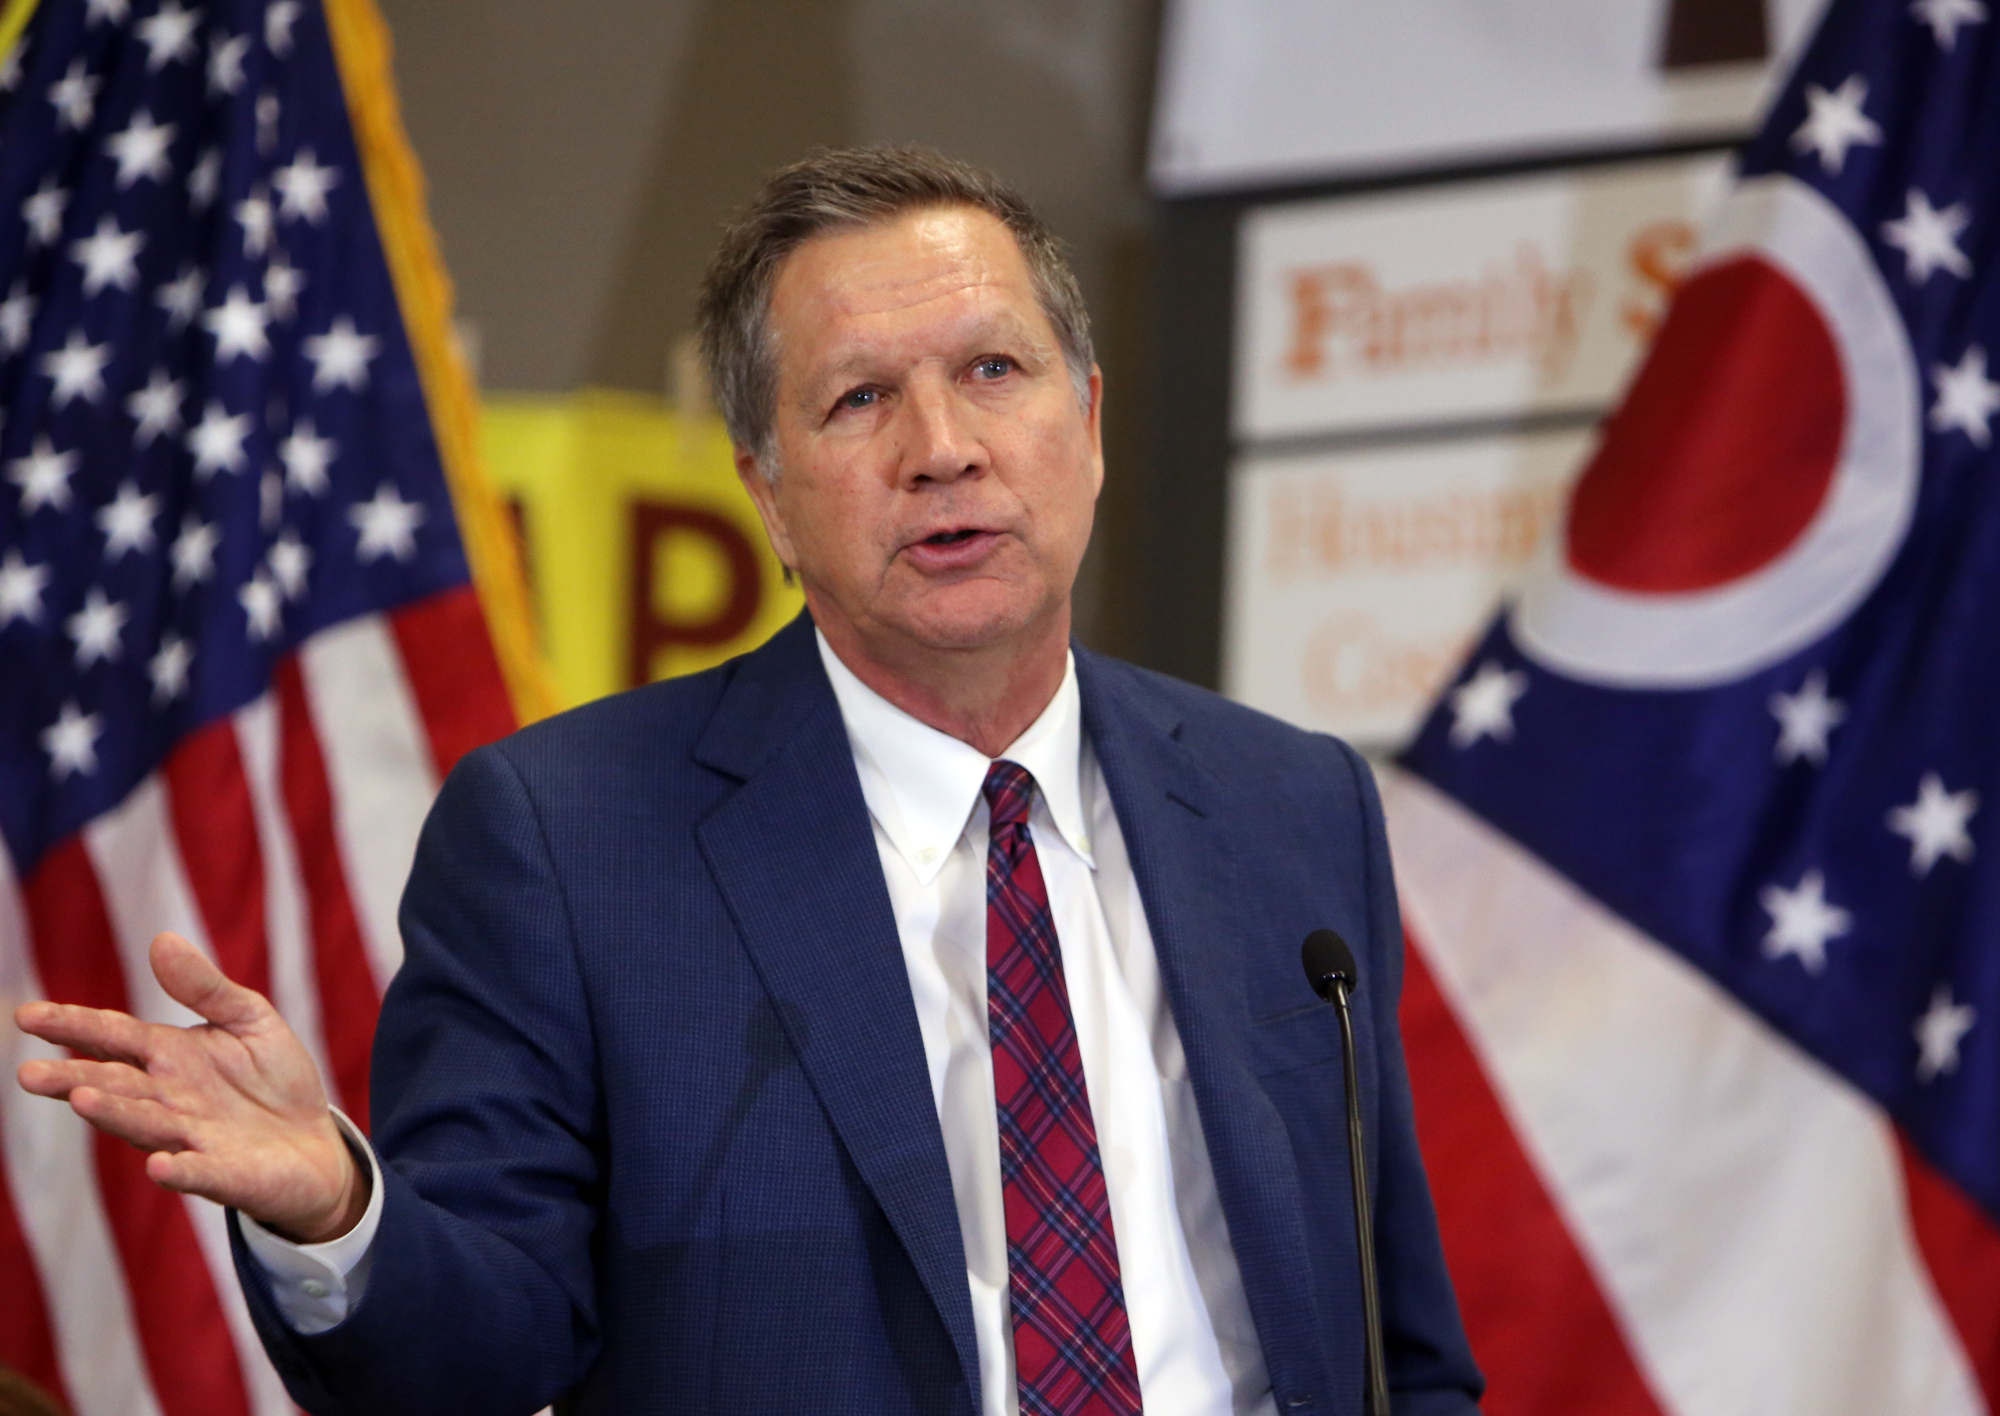 PHOTO: Ohio Gov. John Kasich gives his end of the year speech at Westerville Area Resource Ministry (WARM) in Westerville, Ohio, Dec. 22, 2015. 